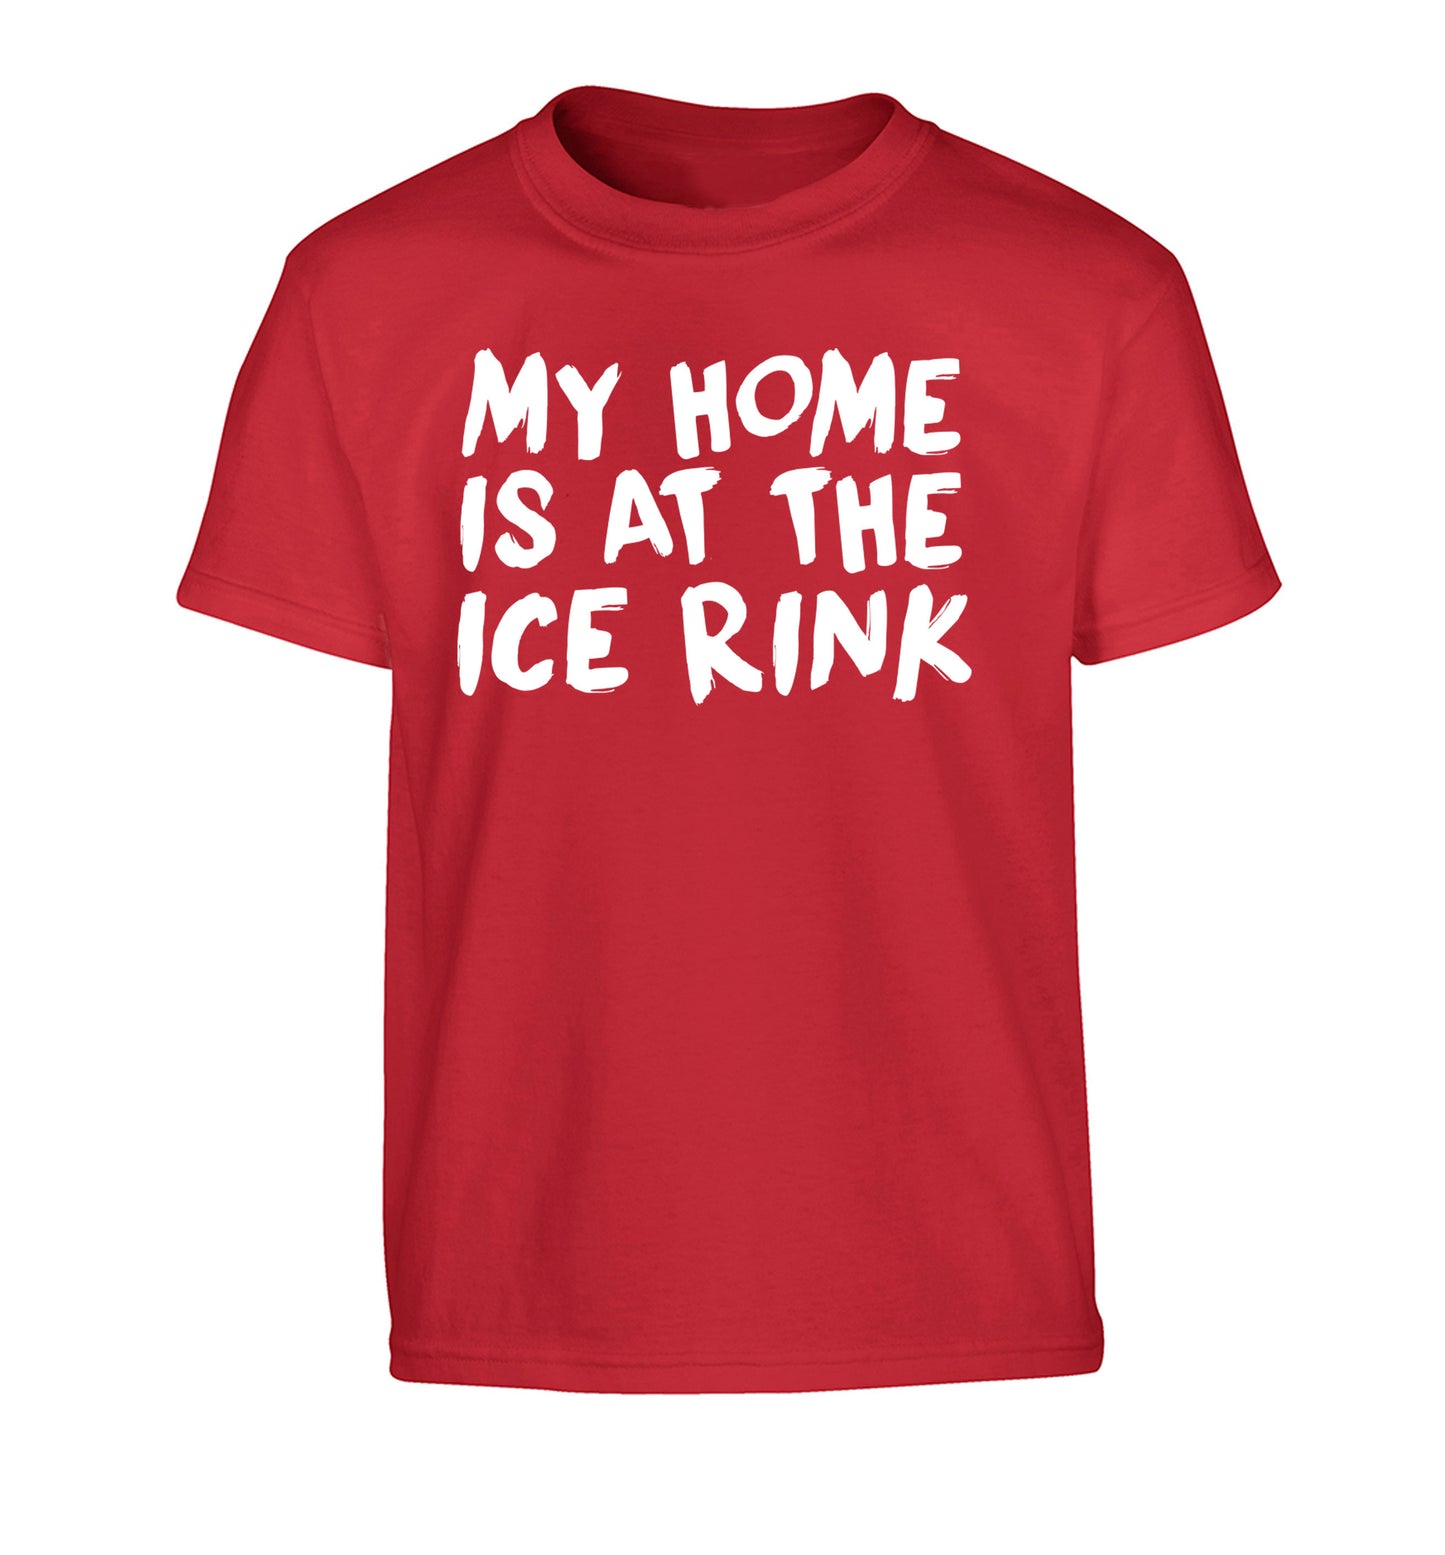 My home is at the ice rink Children's red Tshirt 12-14 Years